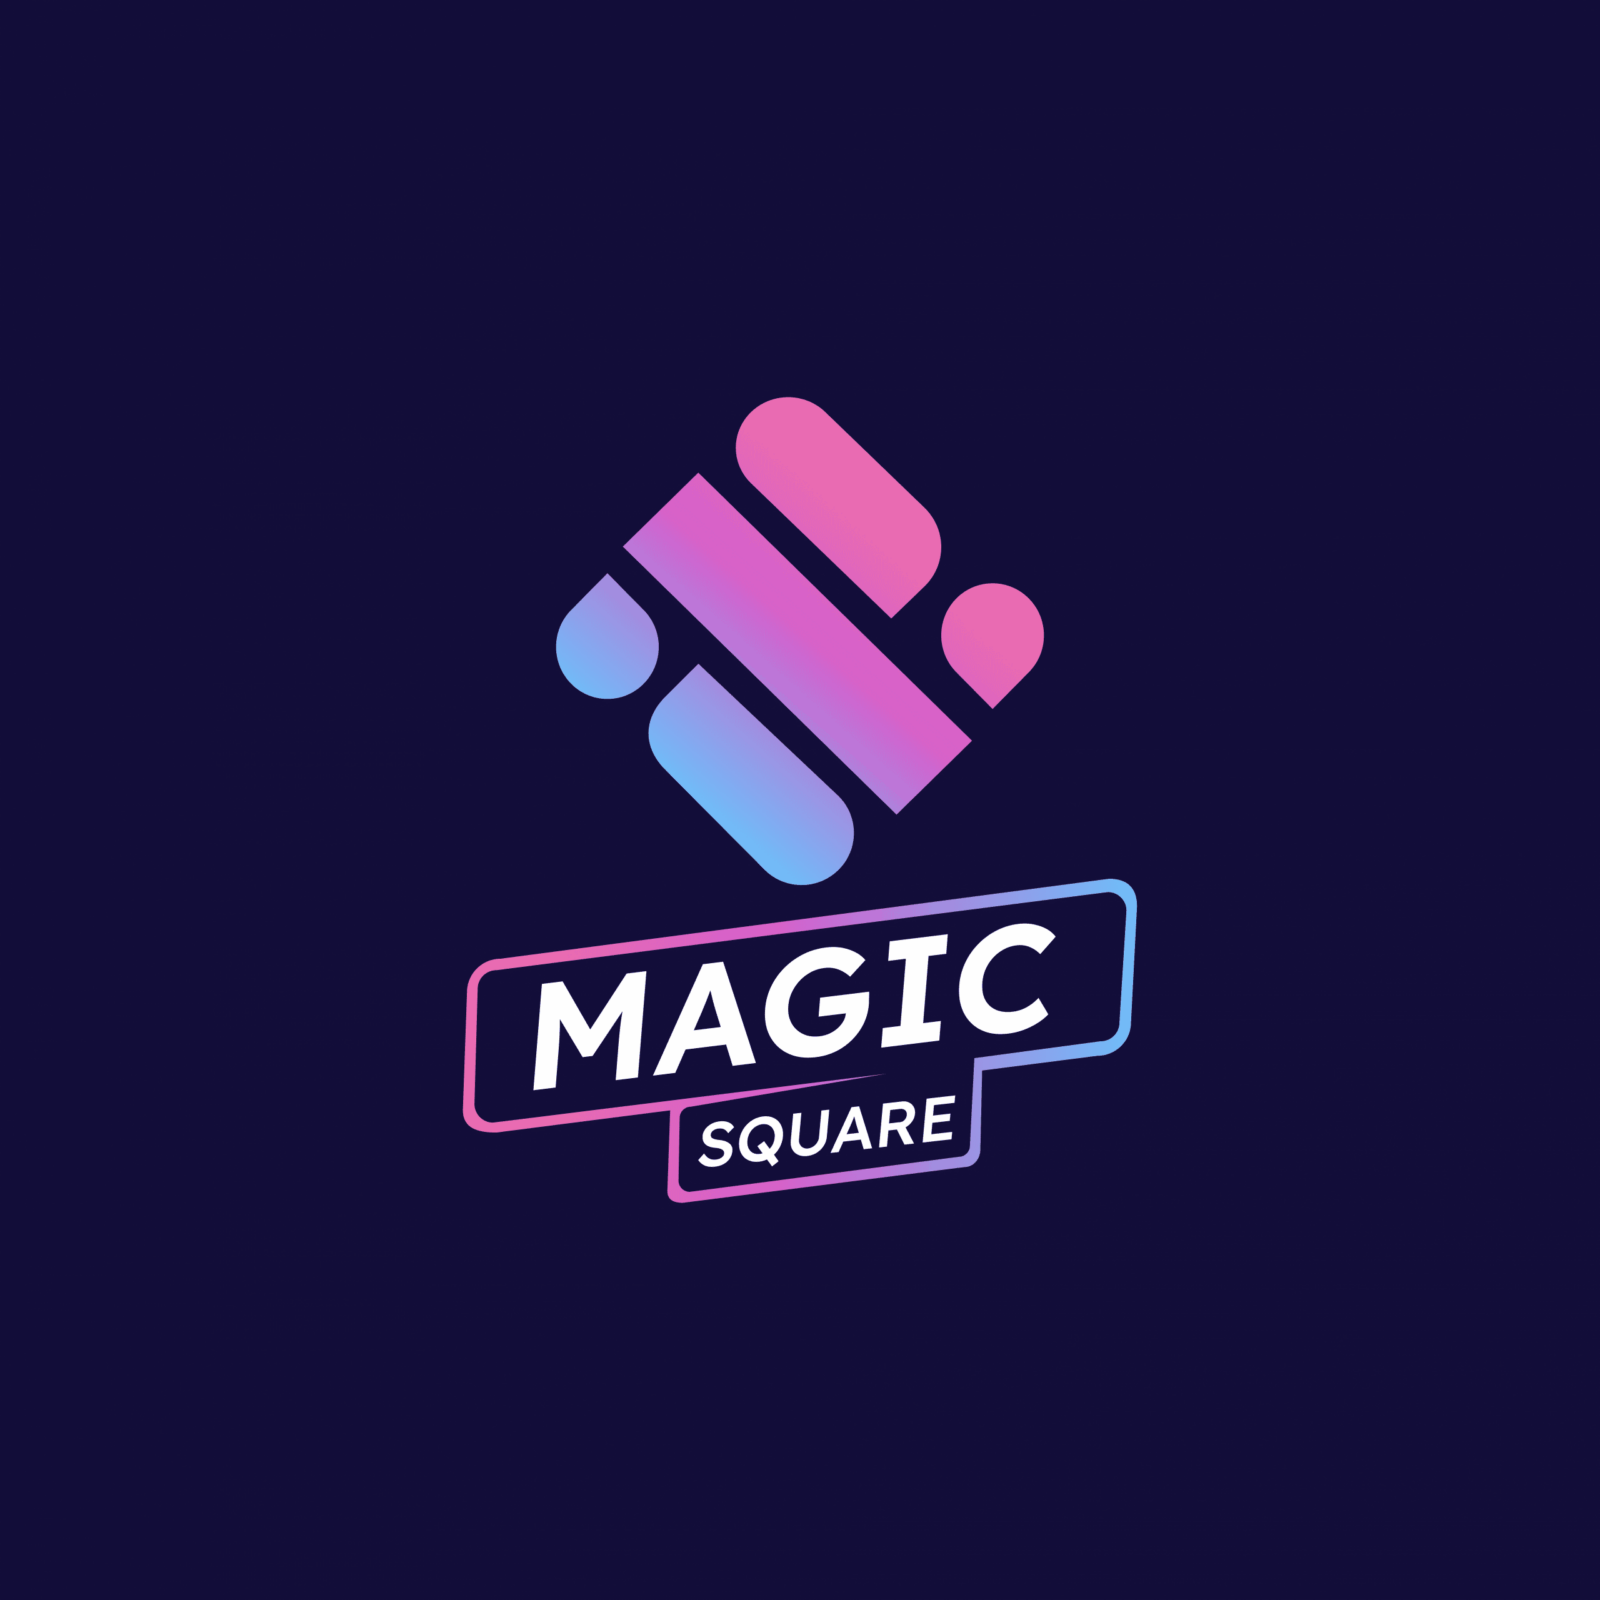 Magic Square New Logo Potrait With Deep Blue Background 1 Web3 App Store Magic Square has announced its integration of the 1inch Swap API, and with it, the launch of a $SQR Swap Competition valued at $25,000 - designed to reward users for their active participation and transactions.